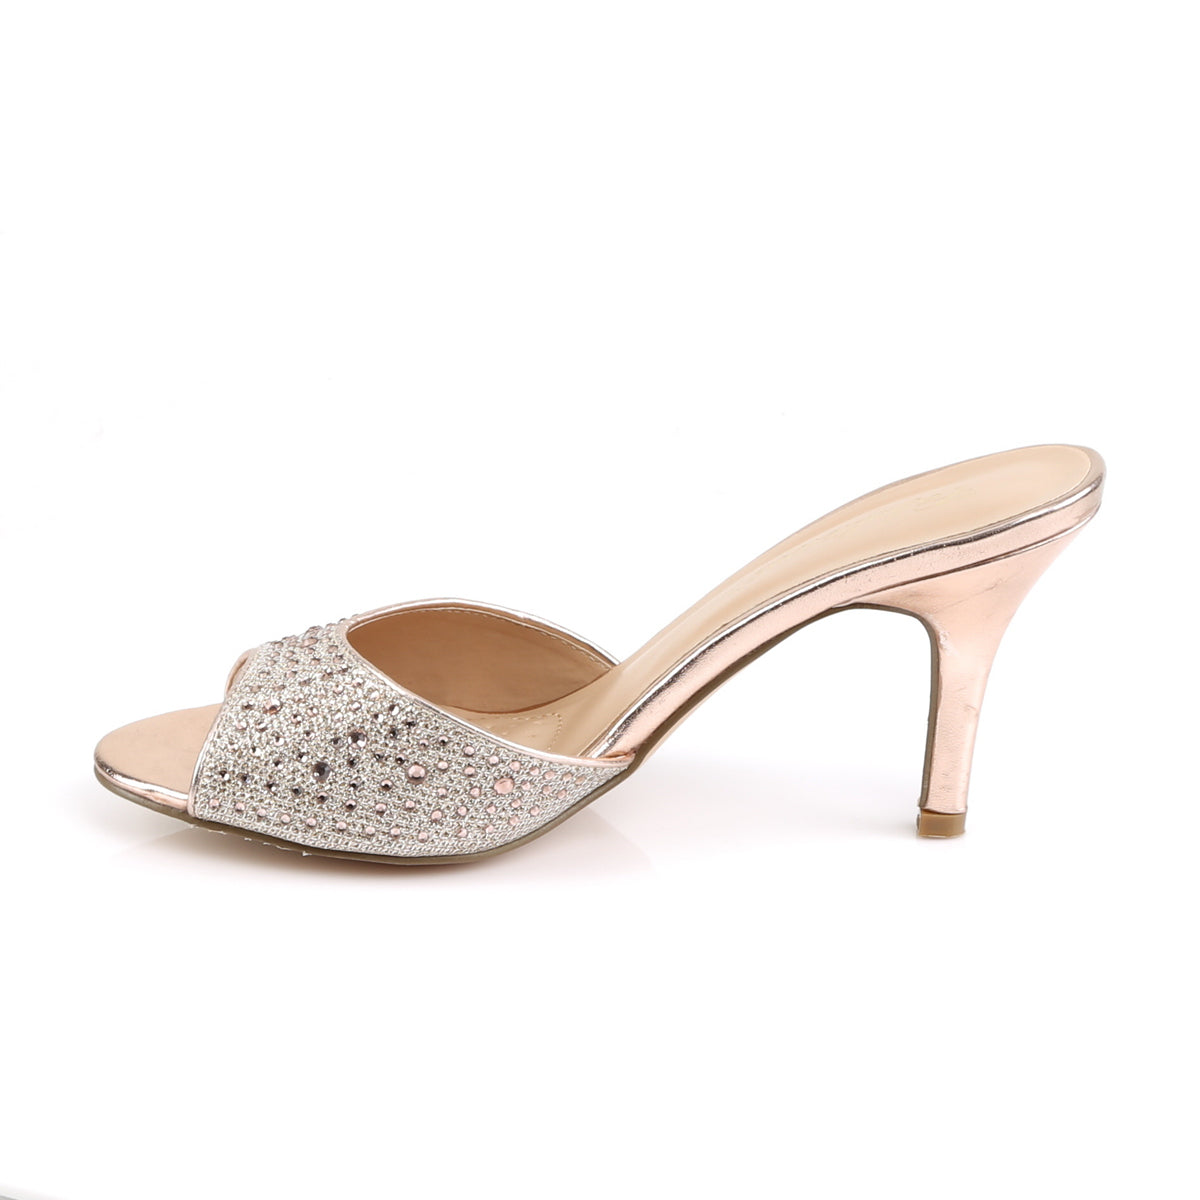 Fabulicious Womens Pumps LUCY-01 Gold Glitter Mesh Fabric